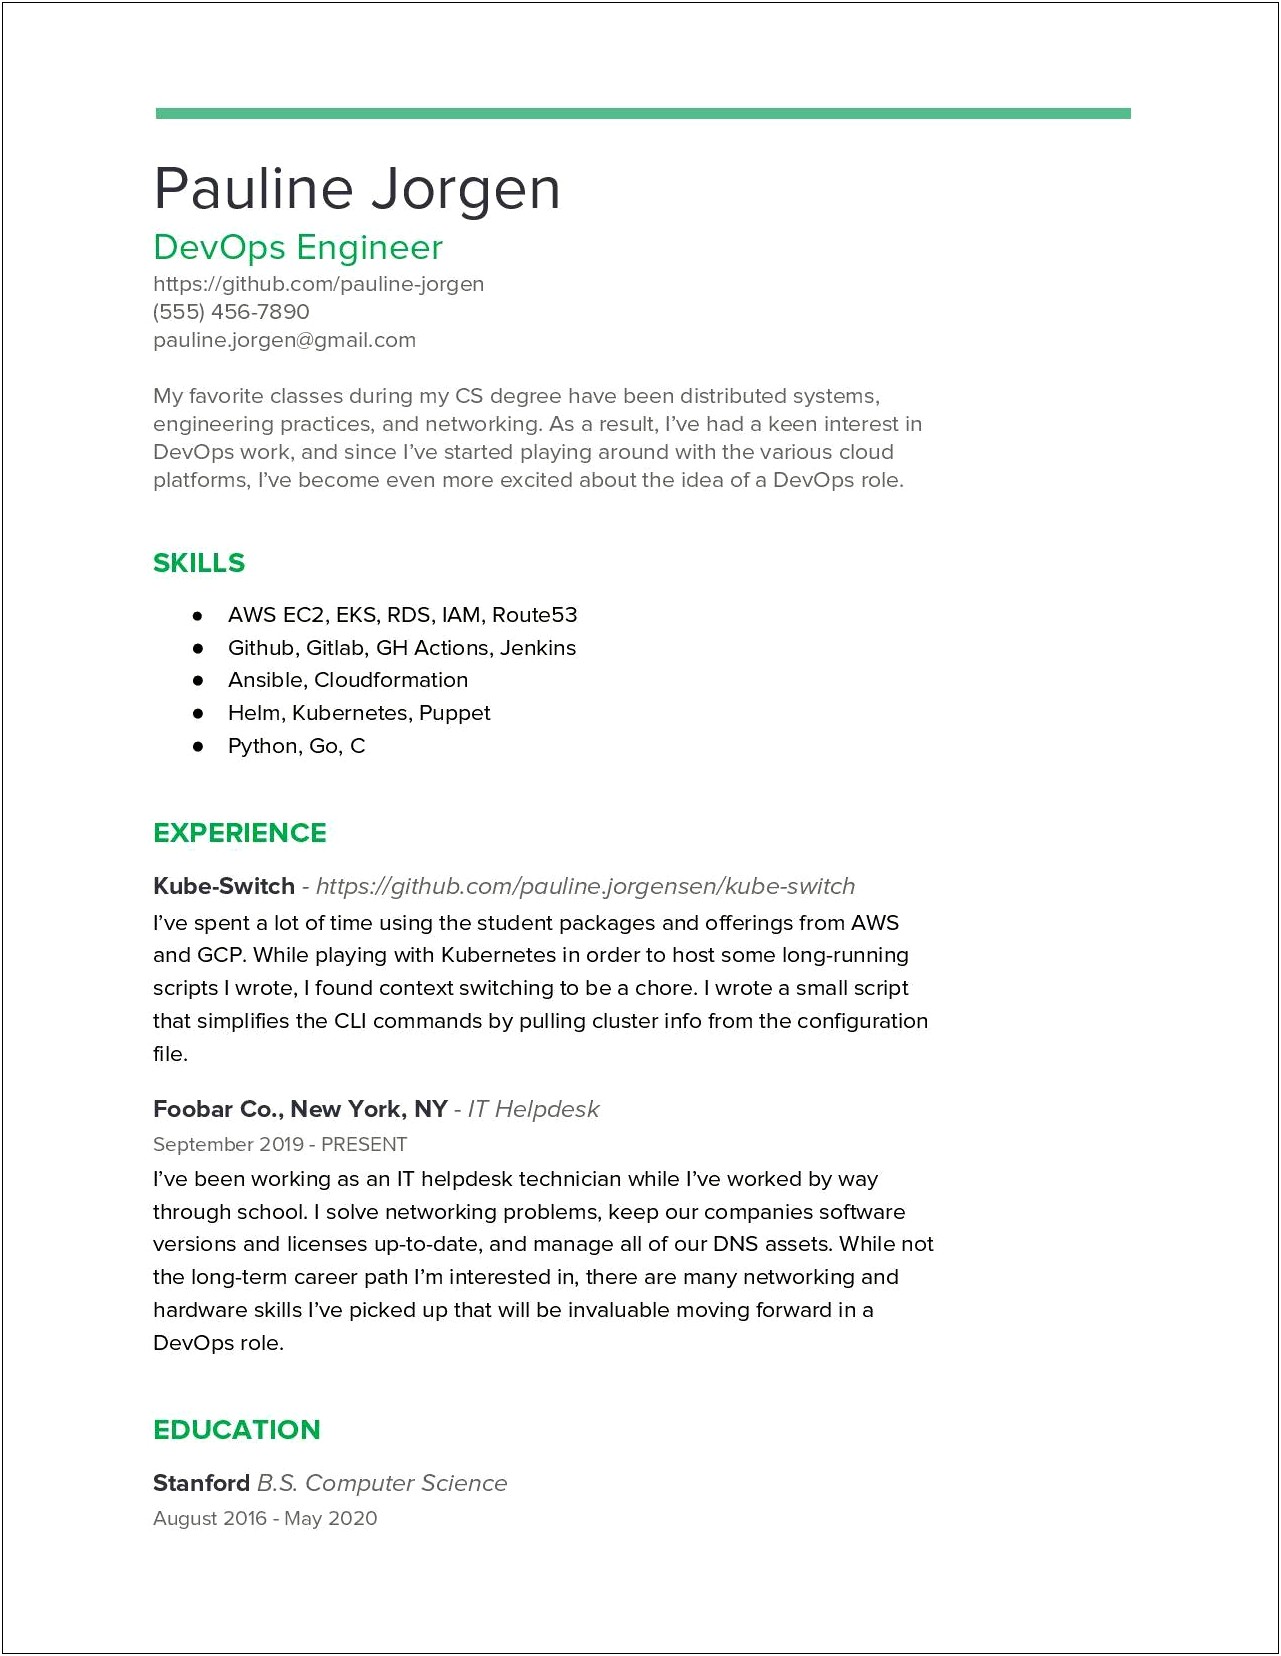 Resume Samples For Cs Students